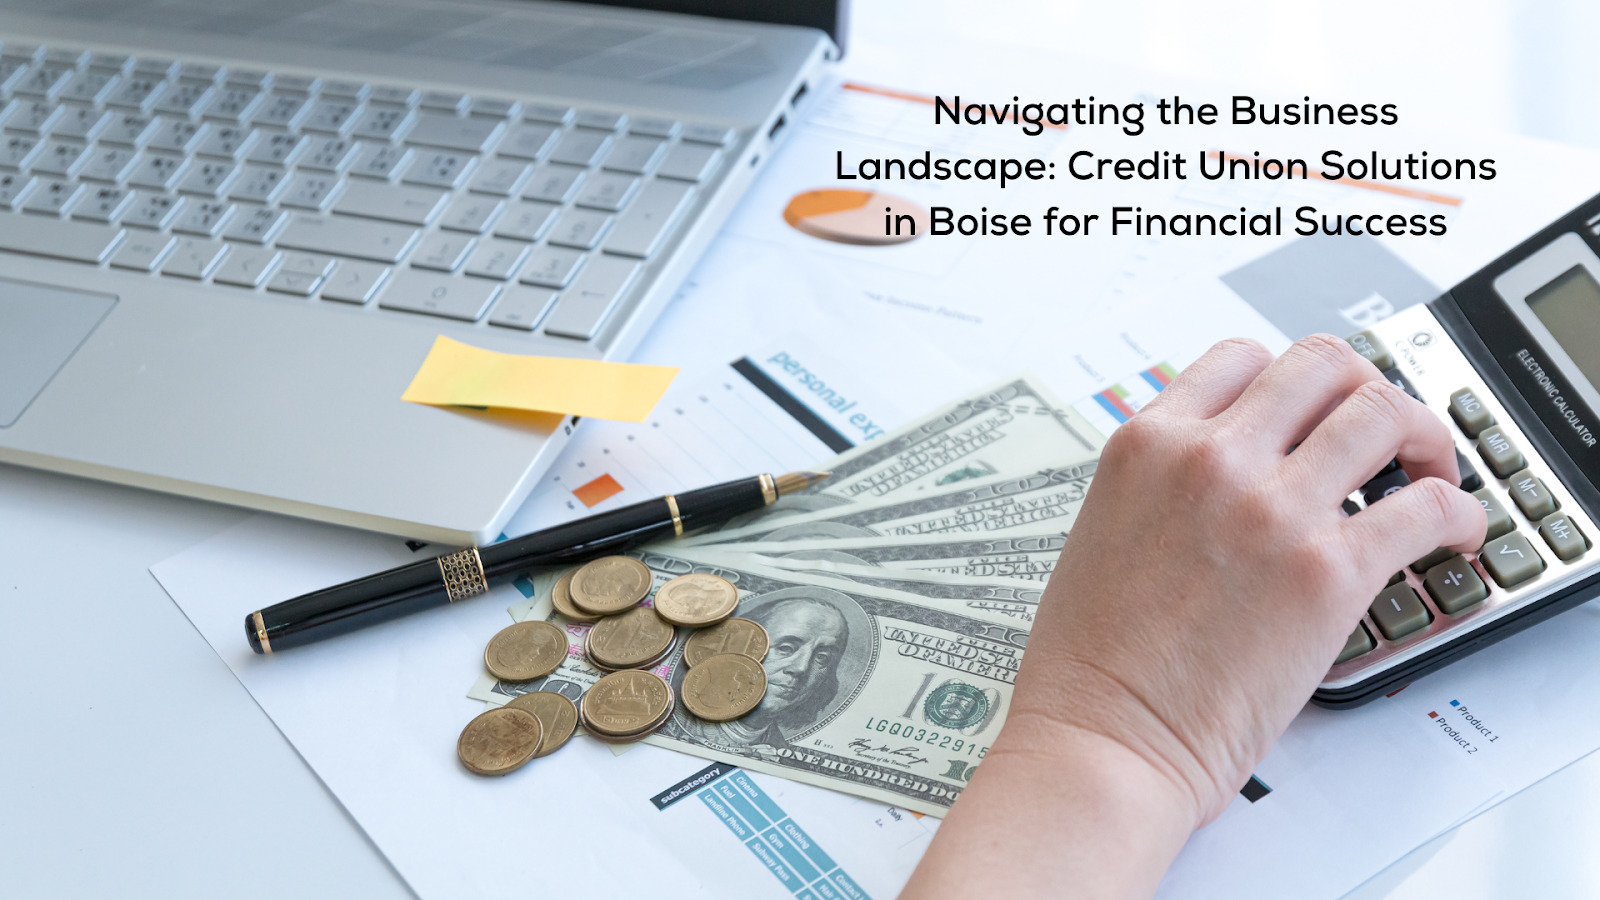 Navigating the Business Landscape: Credit Union Solutions in Boise for Financial Success